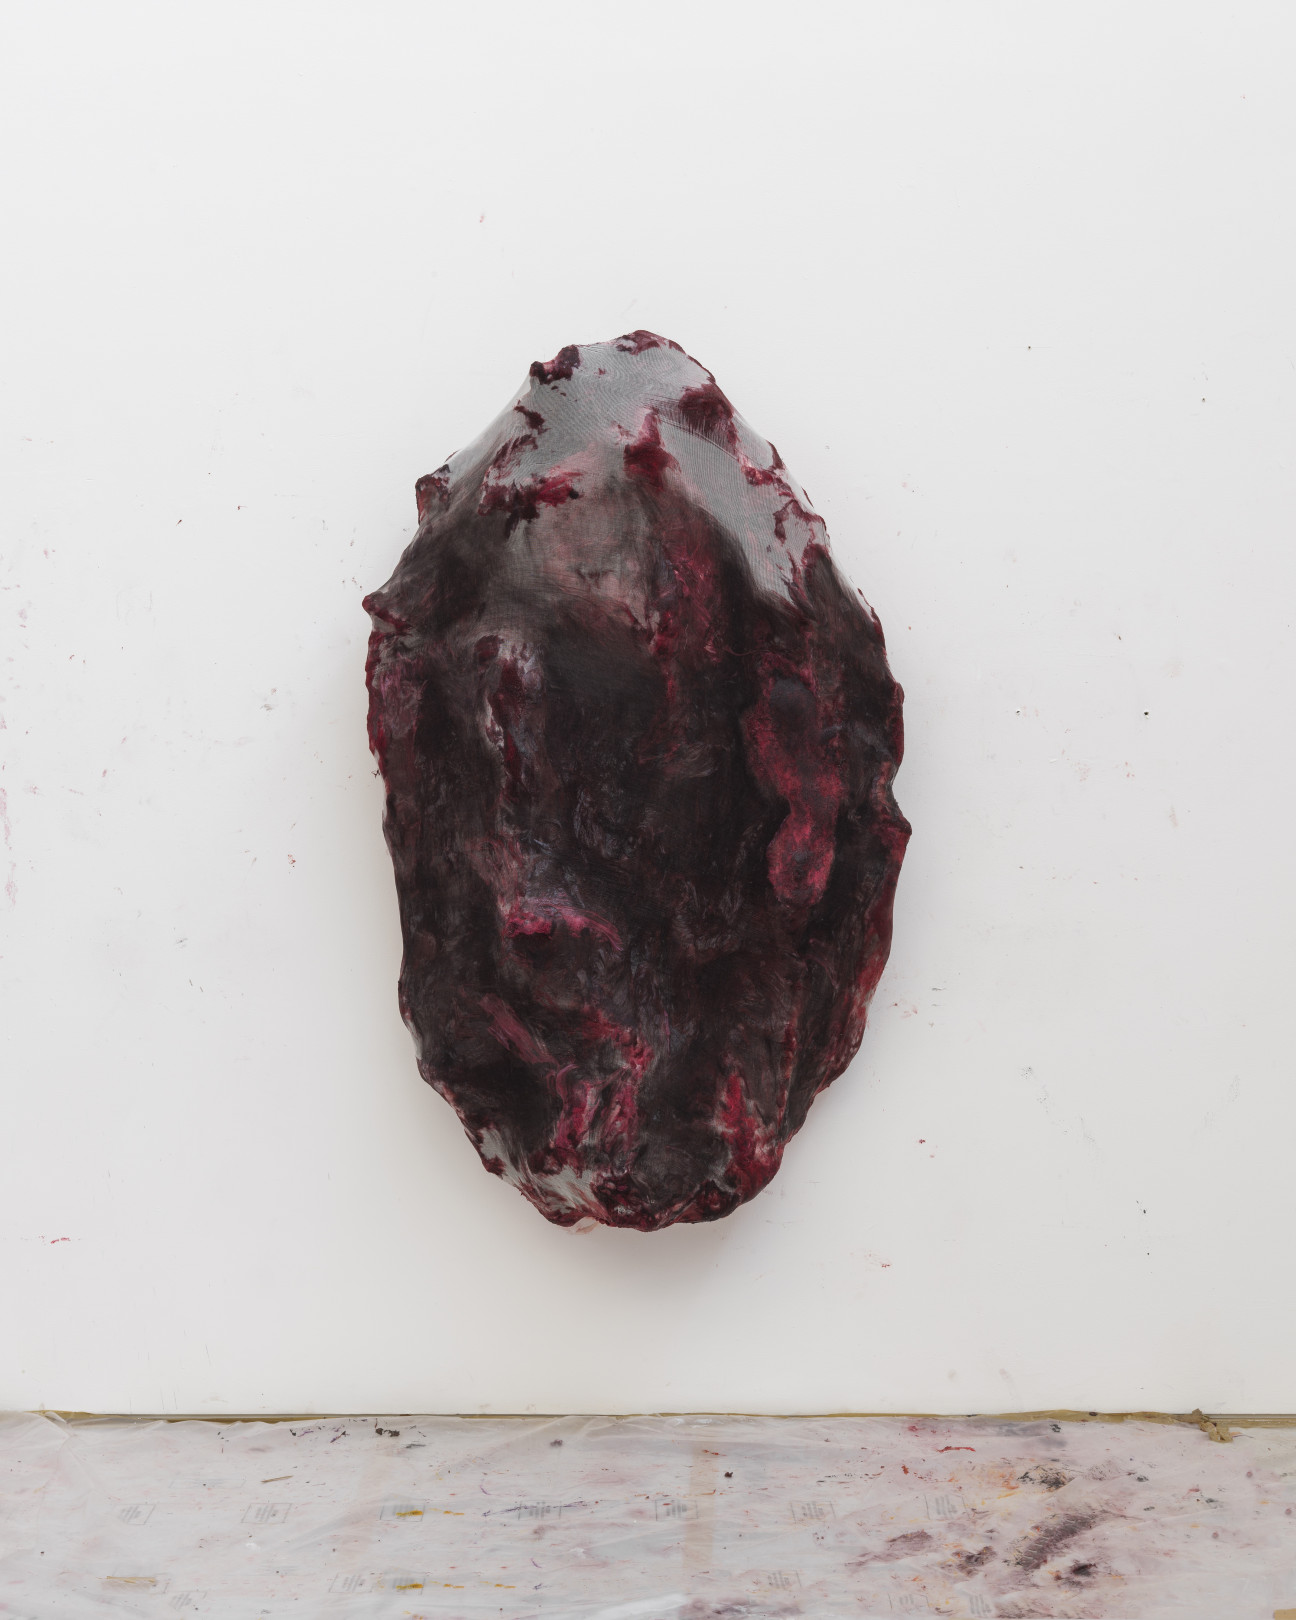 「I looking in at me」2016 / Silicone, fibreglass and gauze, 195 x 105 x 50 cm  / © Anish Kapoor, 2018 / Courtesy of SCAI THE BATHHOUSE「I looking in at me」2016